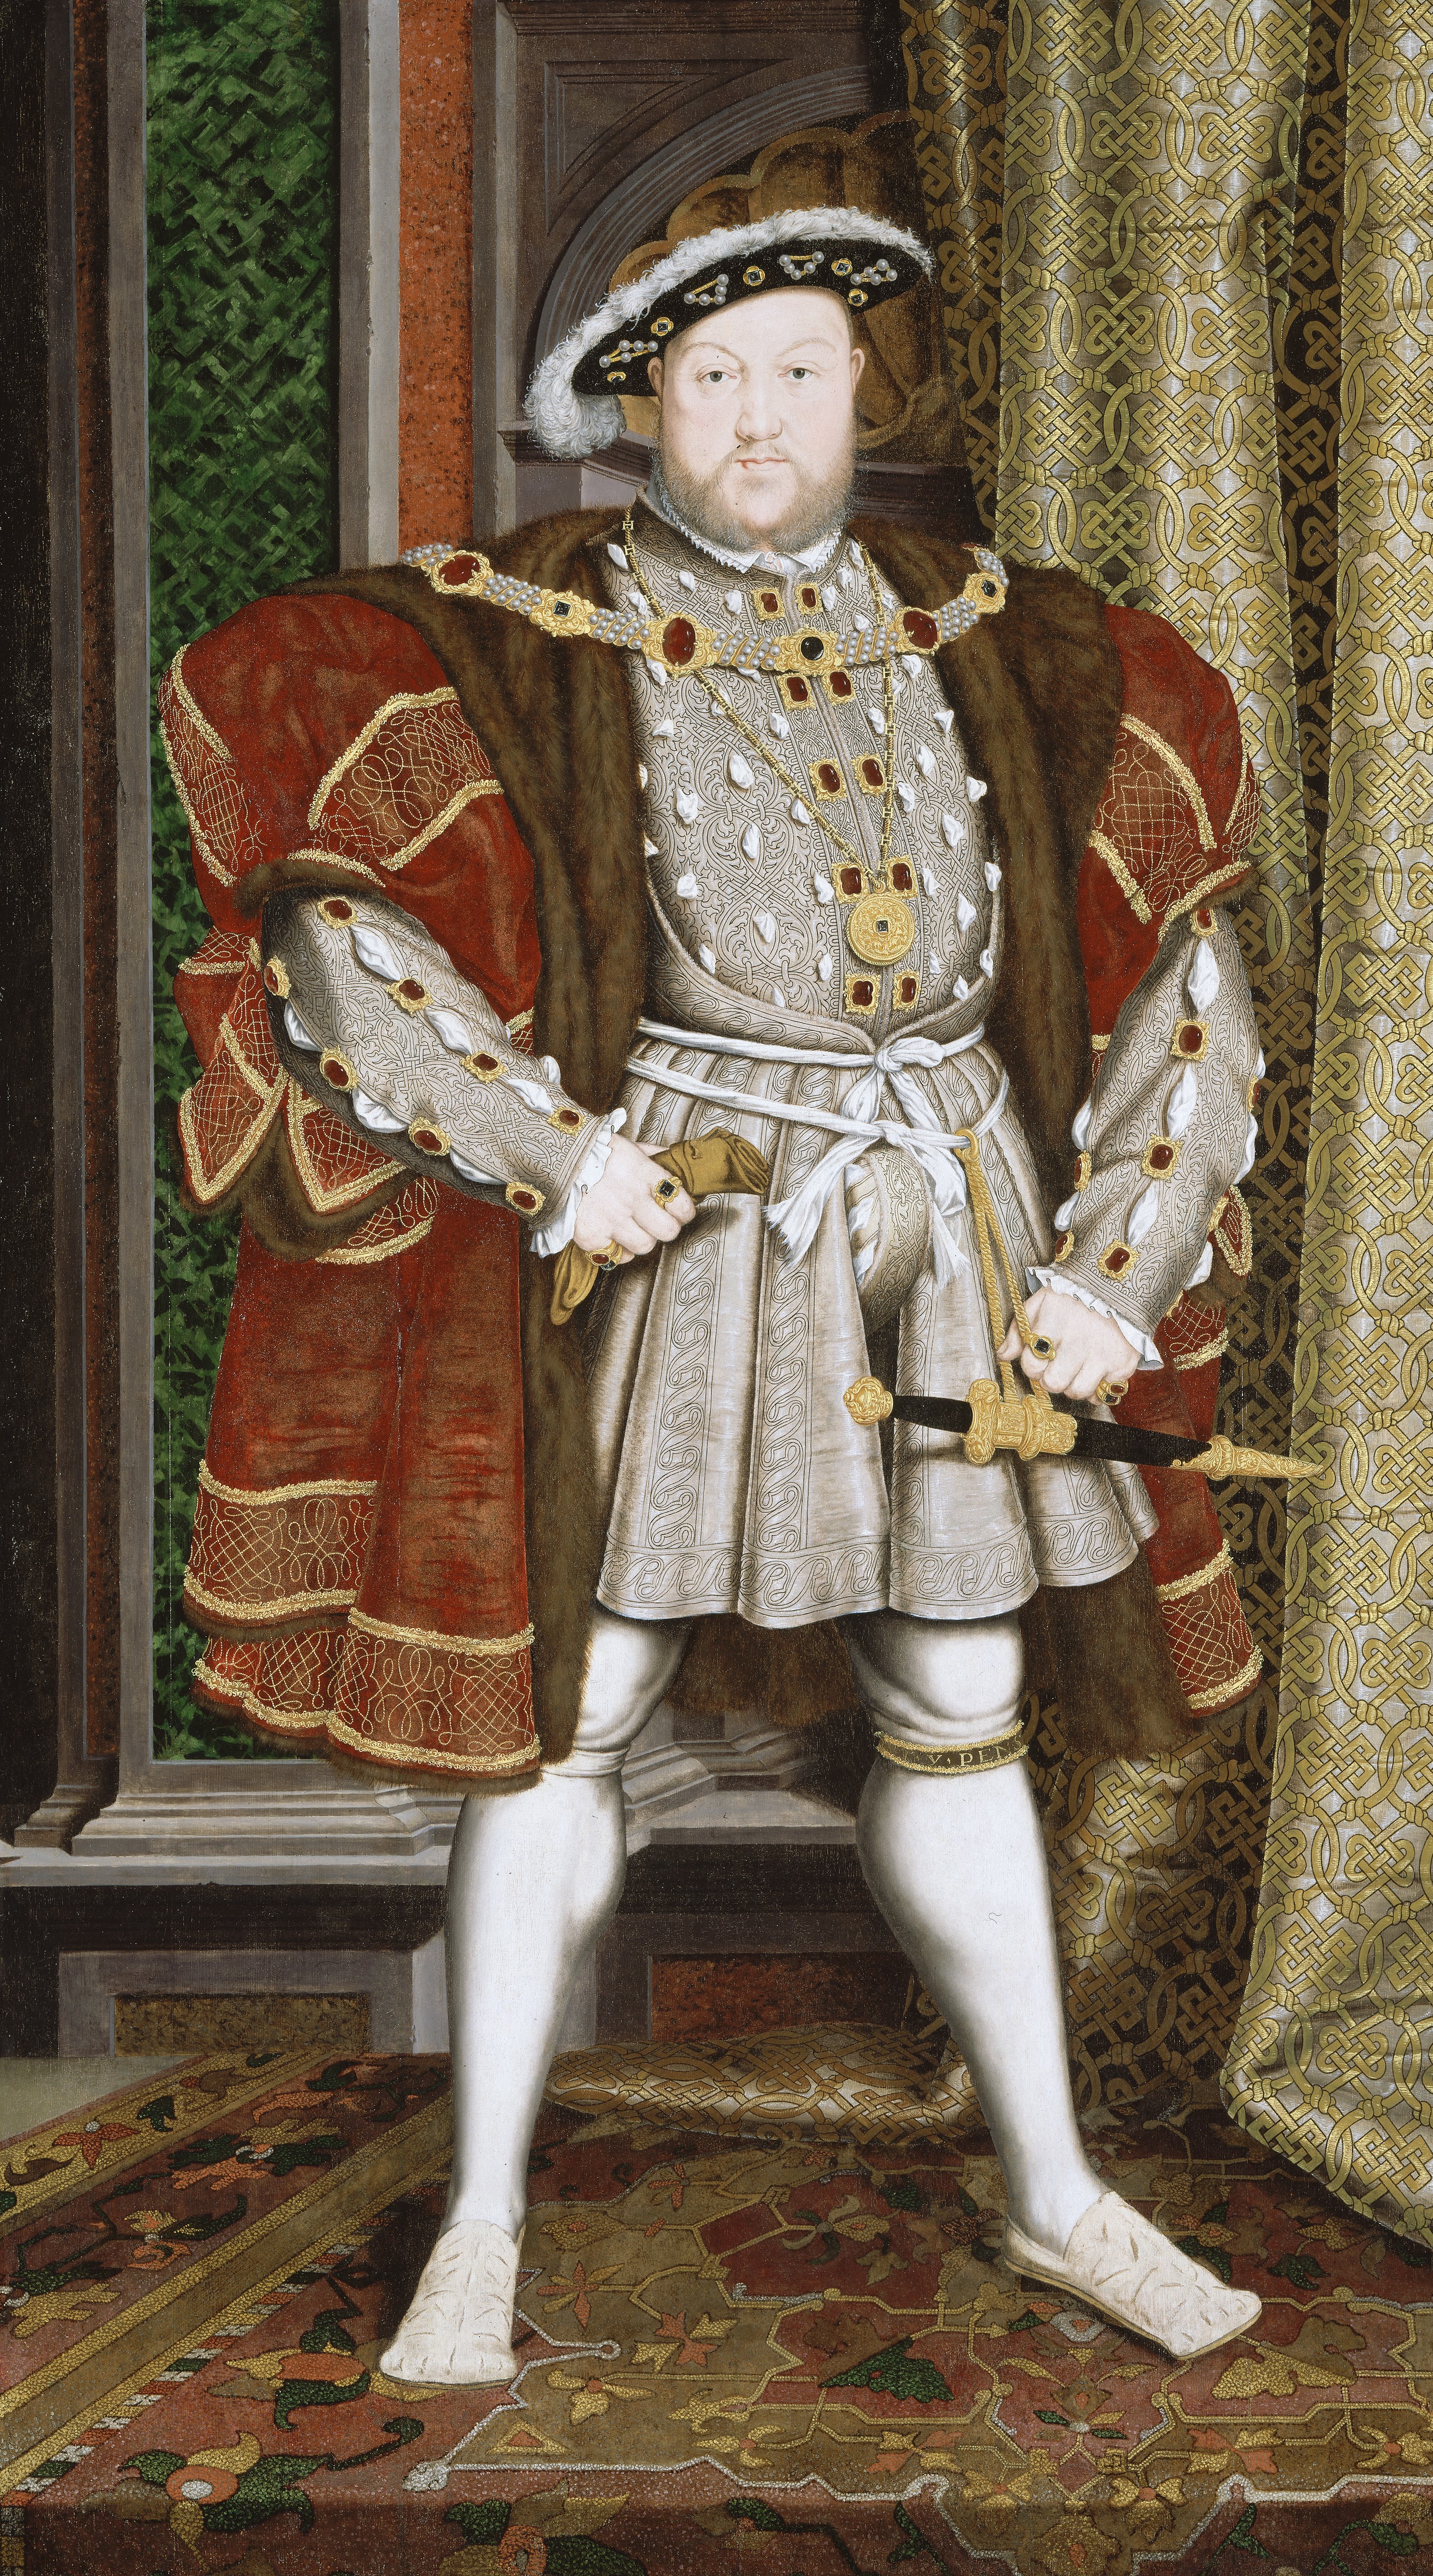 Workshop of Hans Holbein the Younger (German, Augsburg 1497/98–1543 London), ‘Henry VIII,’ circa 1540. Oil on panel, 93 5/8 by 52 3/4in. (237.9 by 134cm). Walker Art Gallery, National Museums Liverpool (WAG 1350). Image Courtesy National Museums Liverpool, Walker Art Gallery 